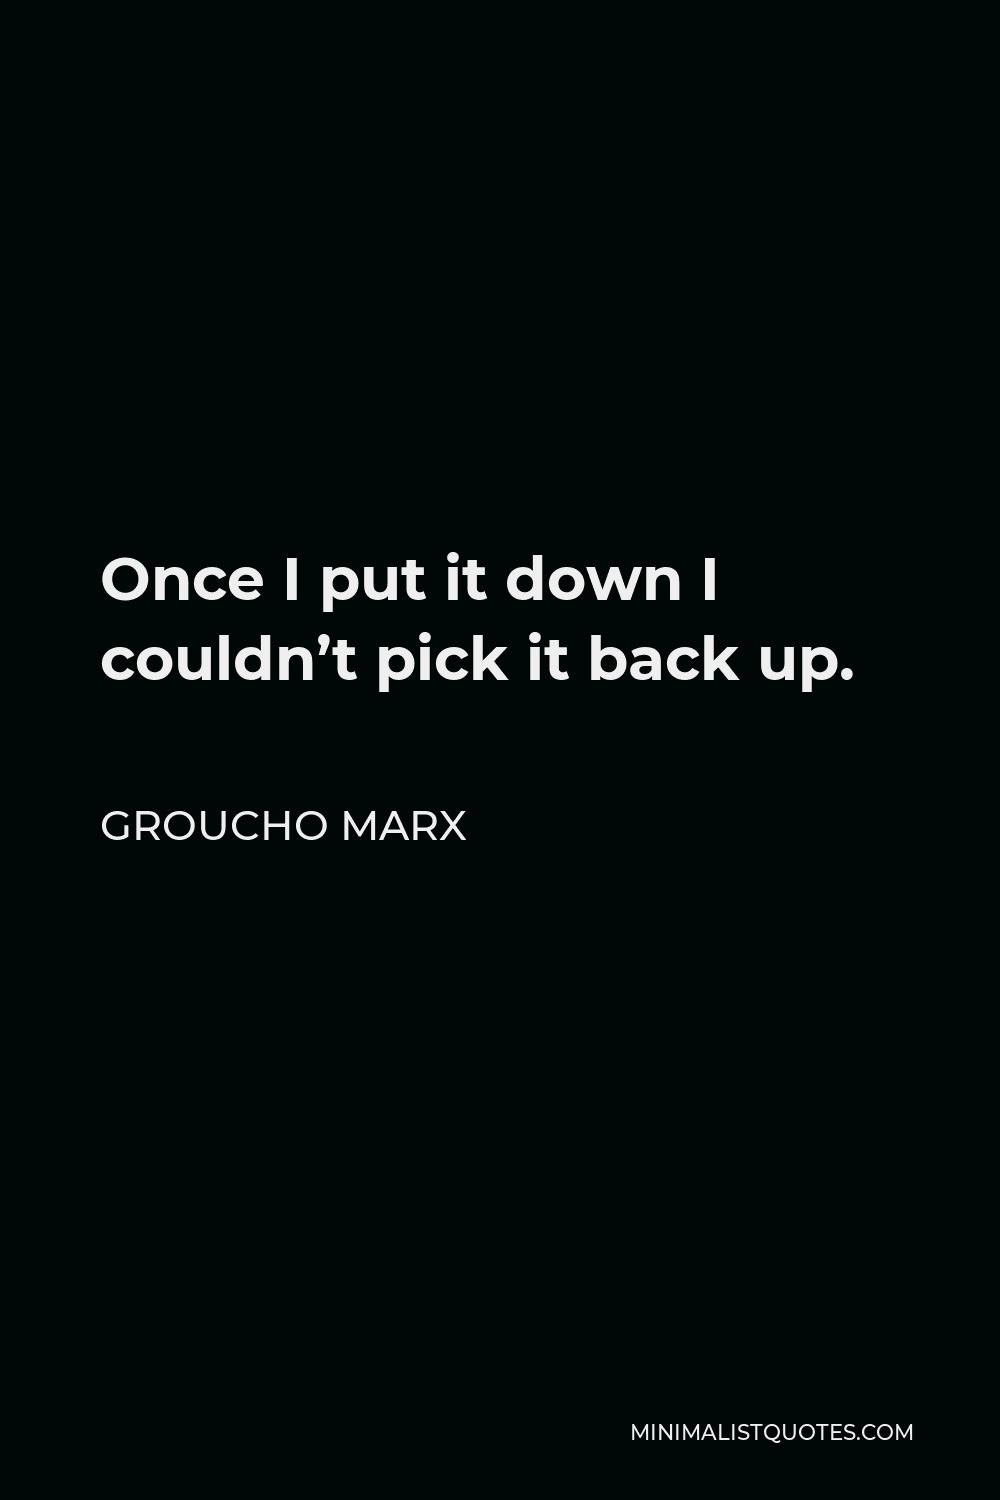 Groucho Marx Quote - Once I put it down I couldn’t pick it back up.